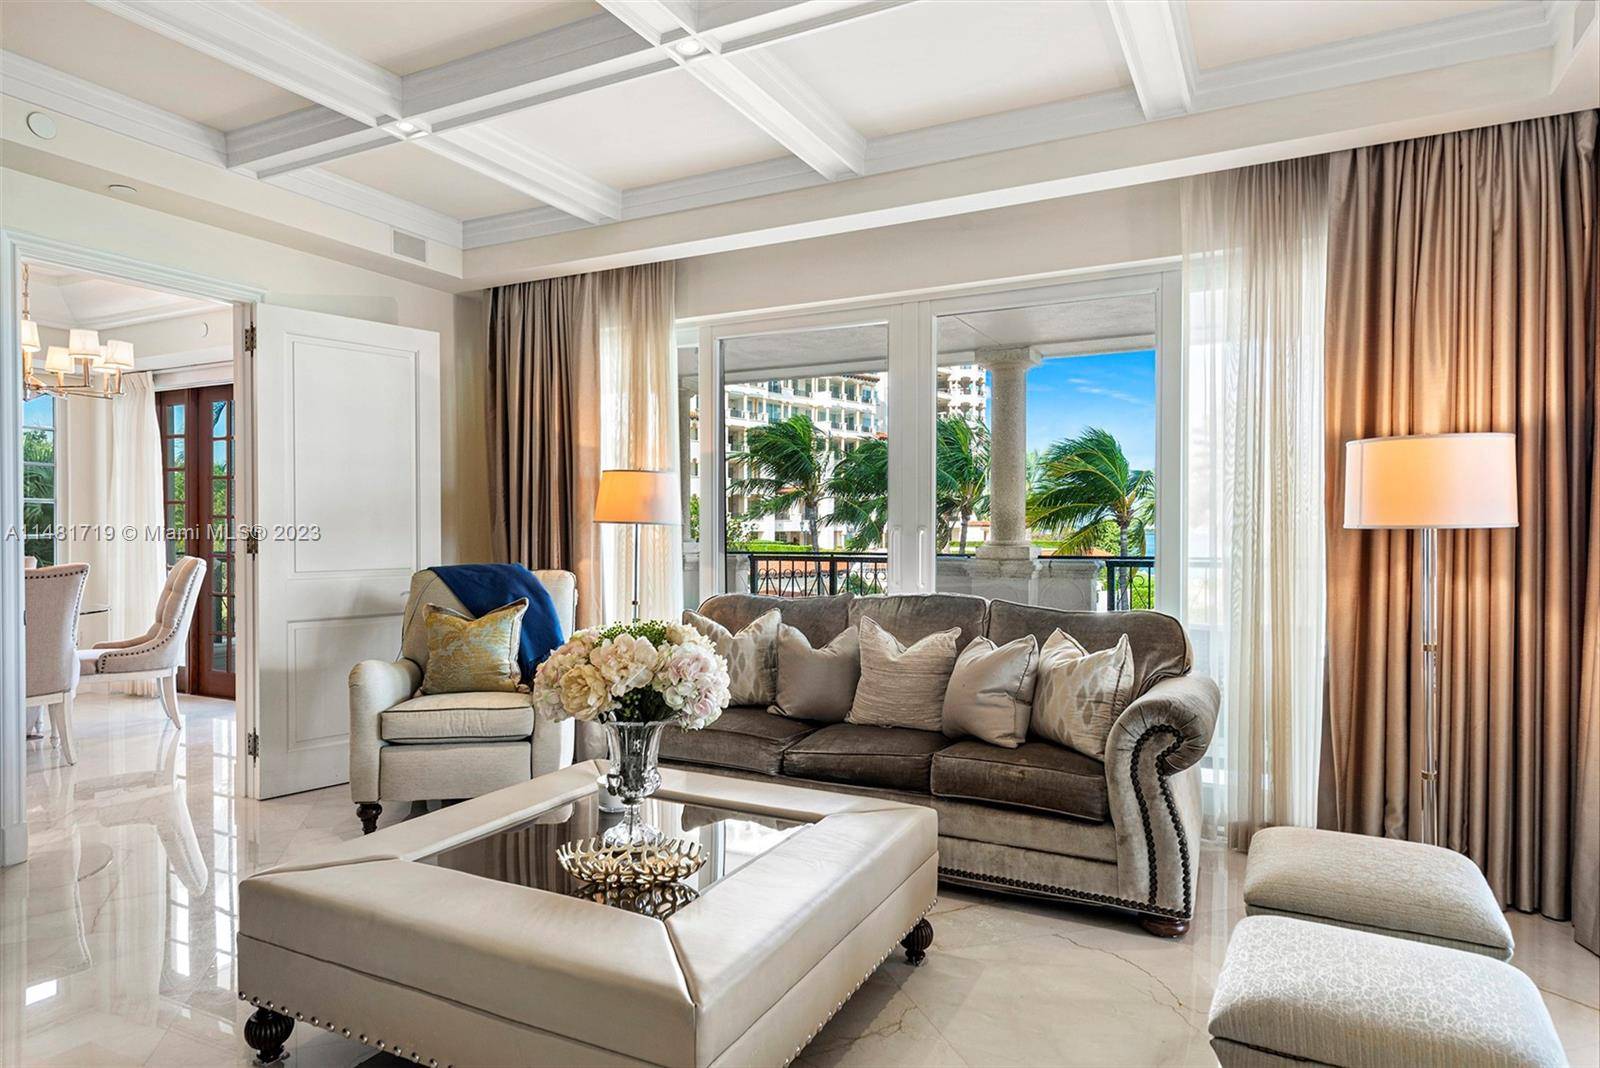 Welcome to the impeccably designed Villa Del Mare residence, where Fisher Island luxury knows no bounds.